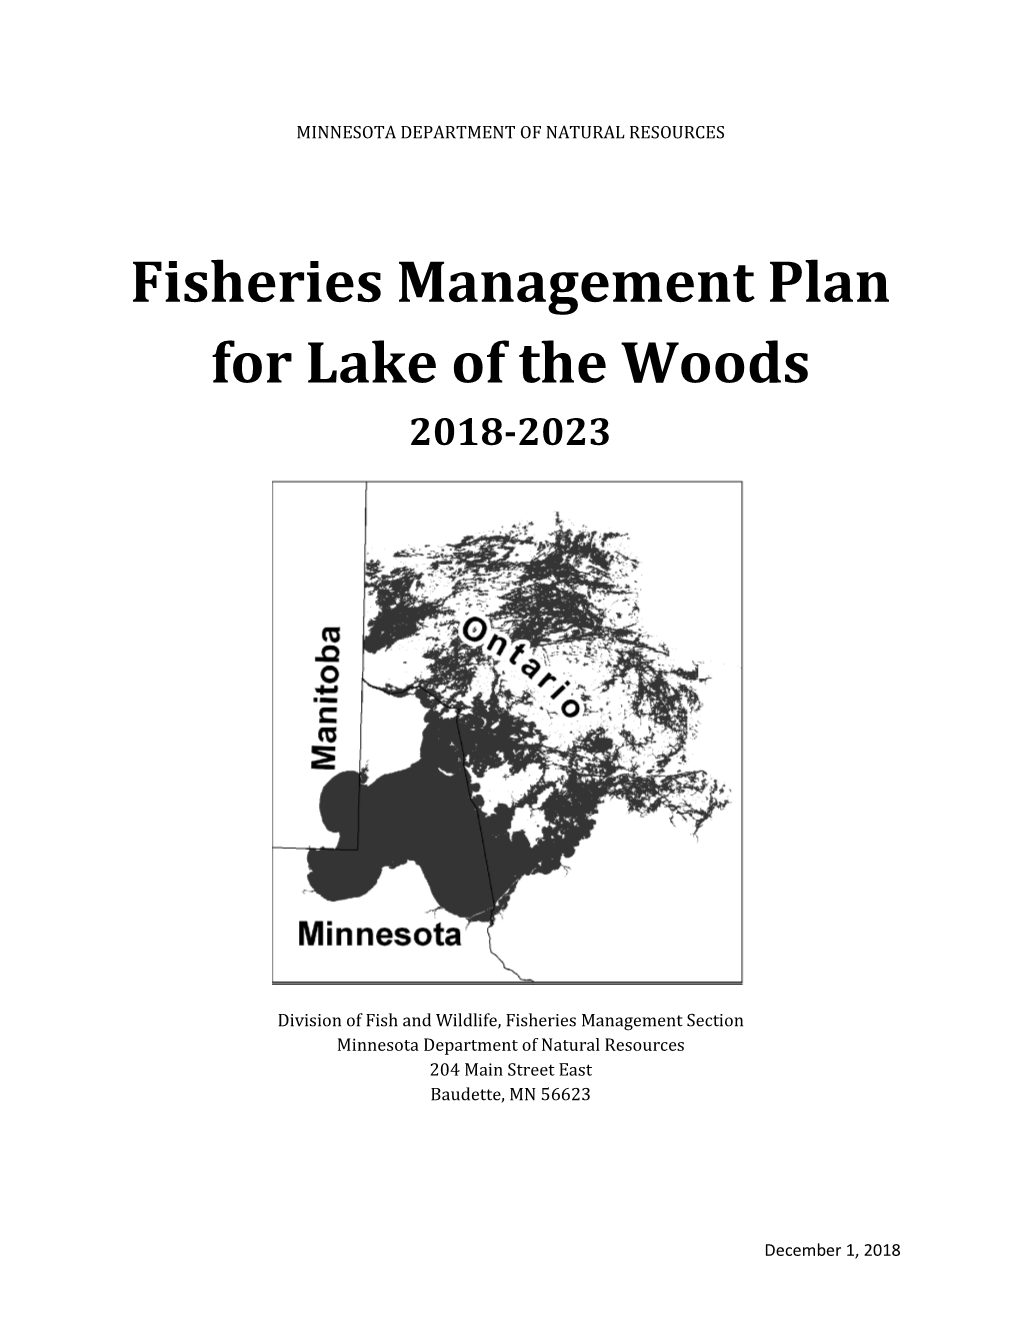 Lake of the Woods Fisheries Management Plan for Another 5 Years